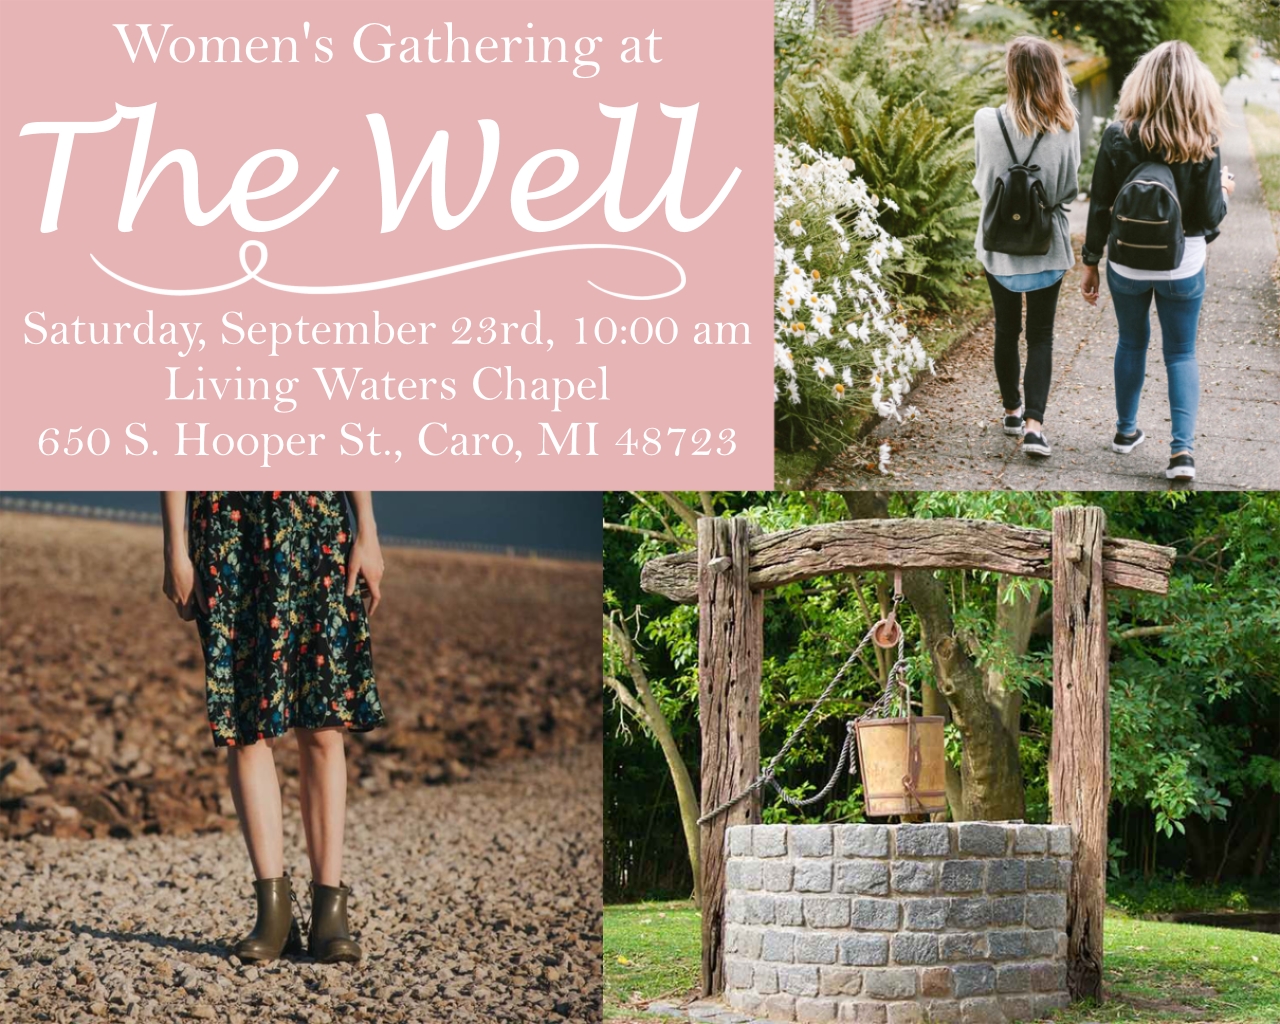 Women's Gathering at The Well